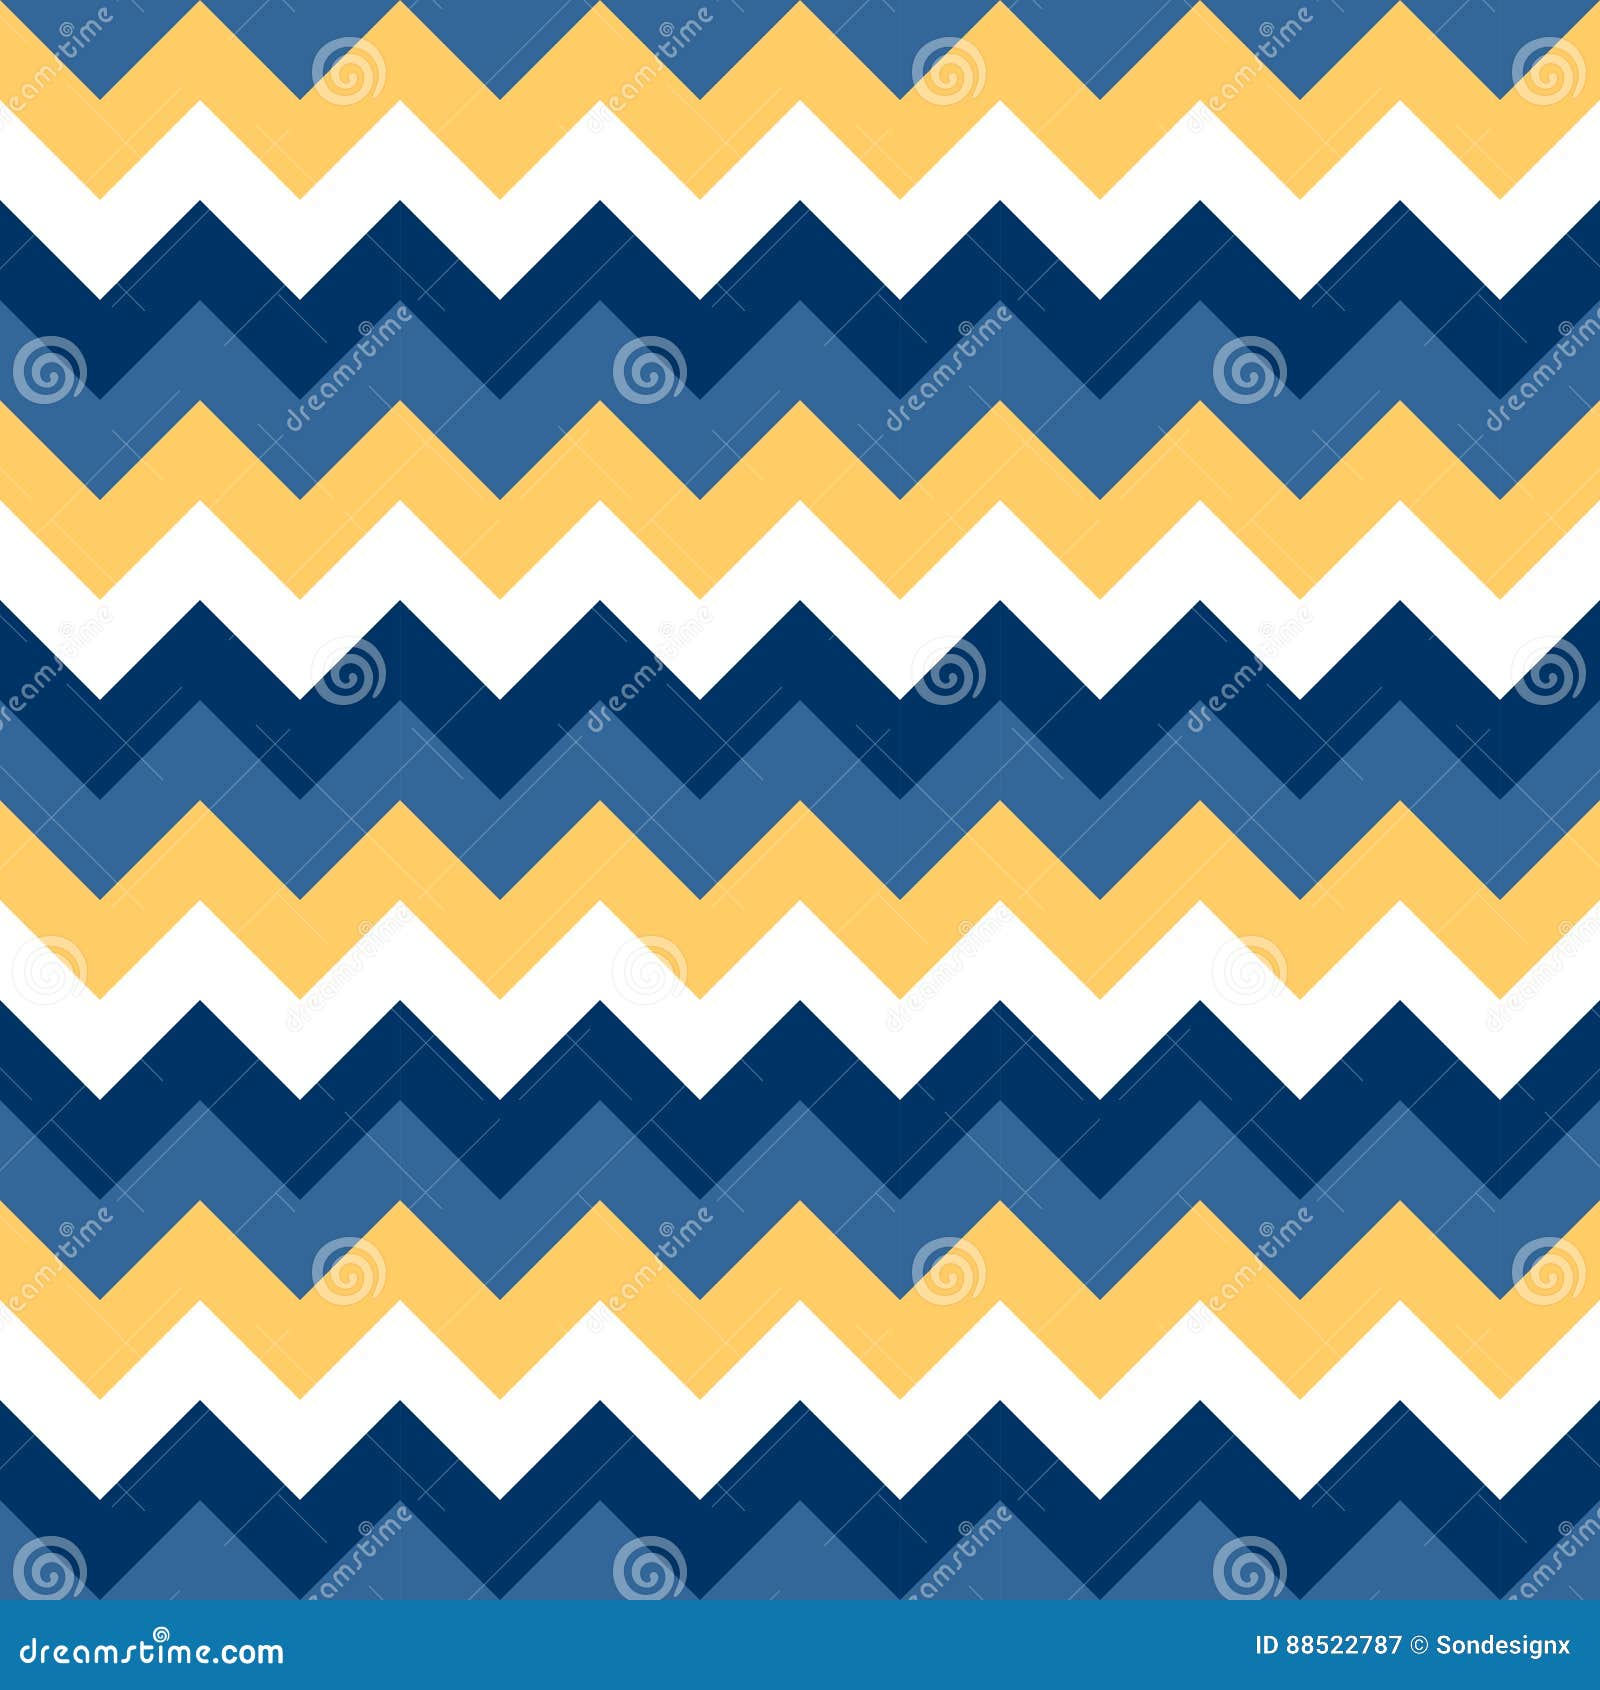 yellow and blue chevron background